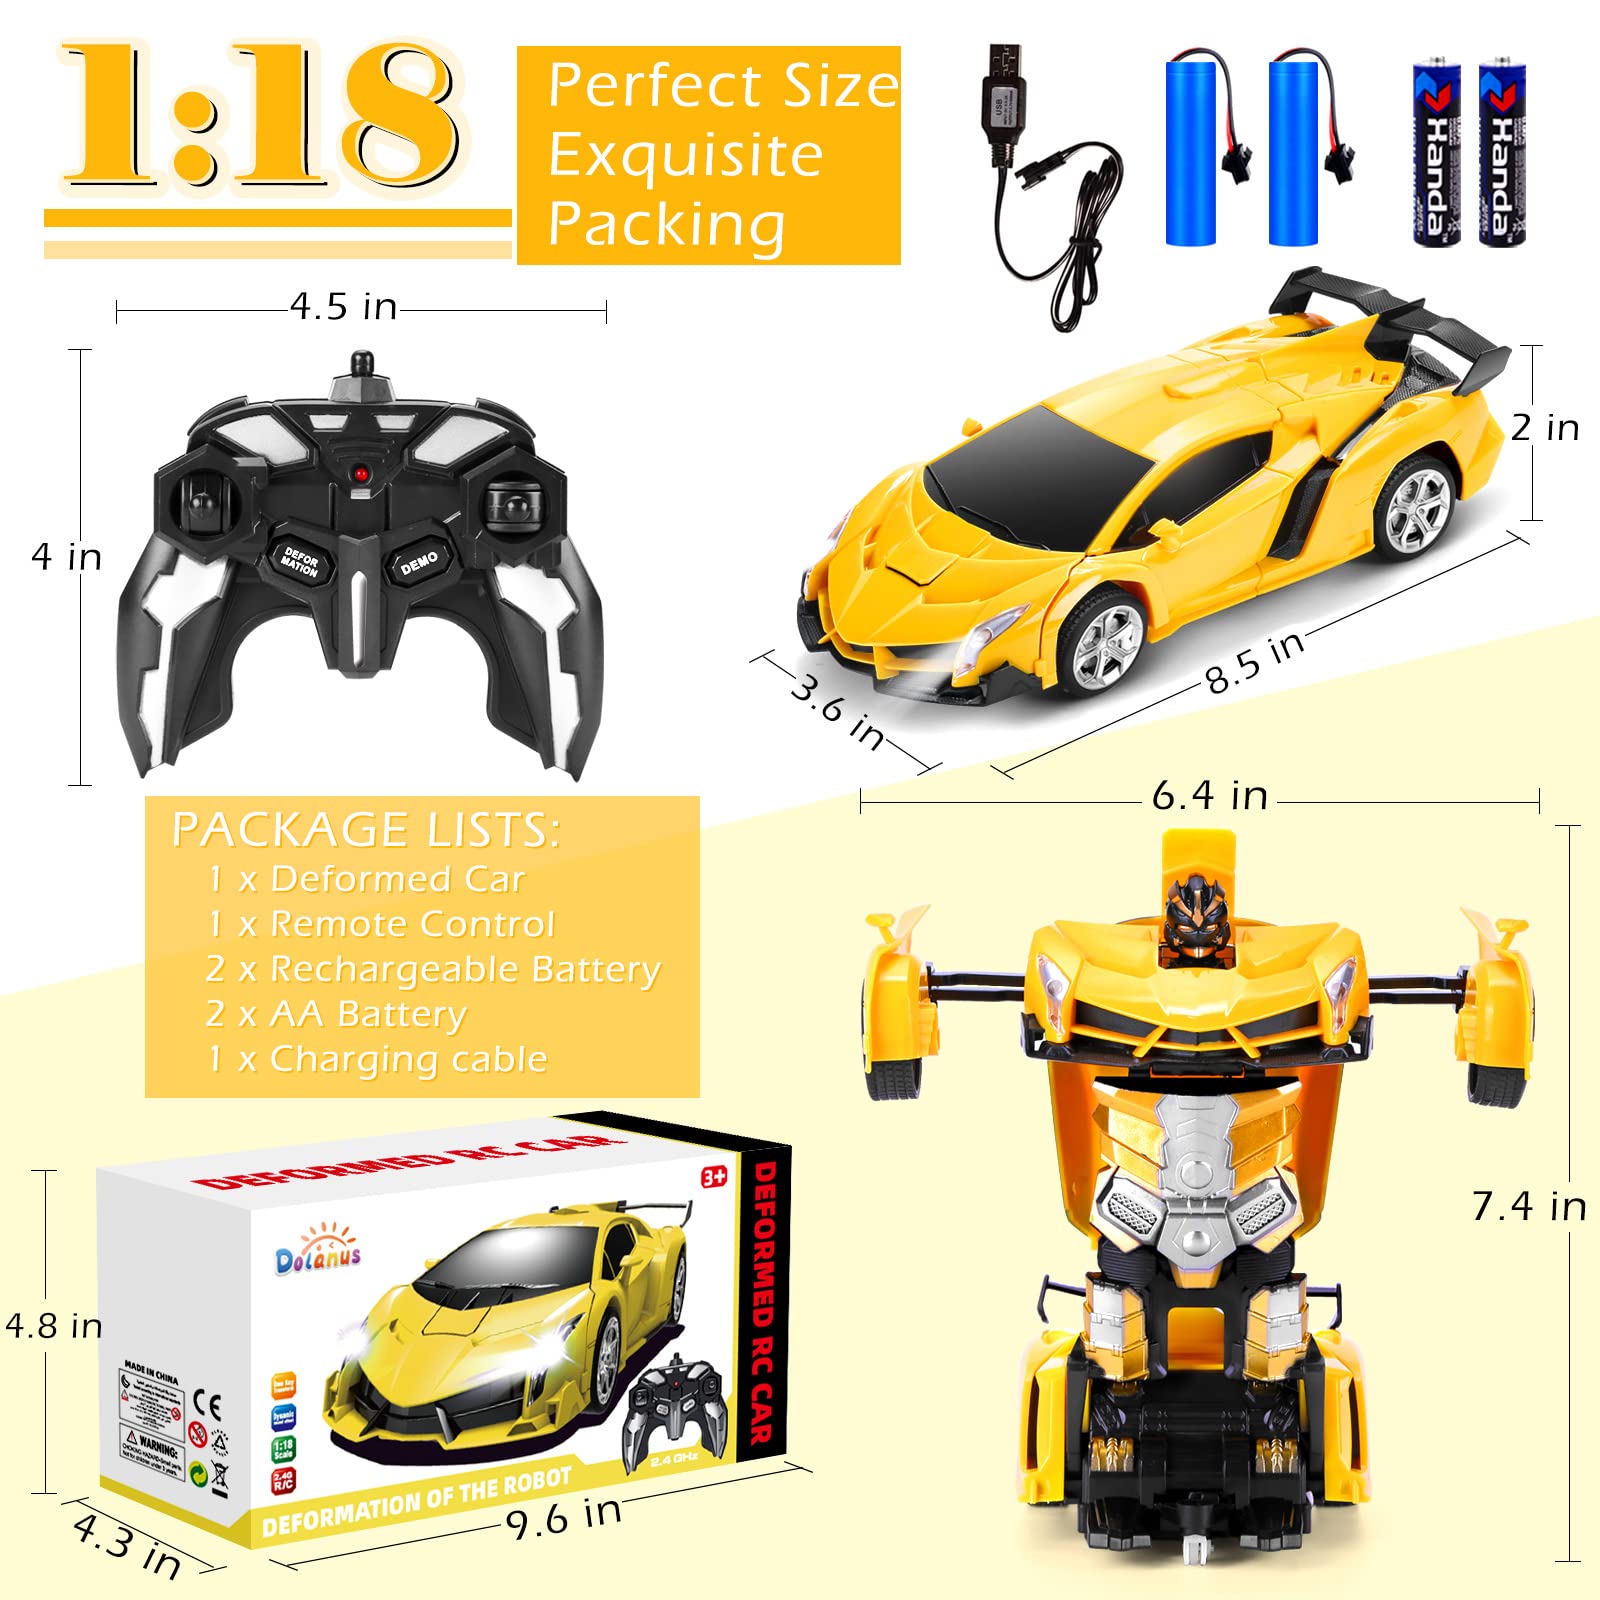 Dolanus Remote Control Car - Transform Robot RC Cars Contains All Batteries: One-Button Deformation and 360 Degree Rotating Drifting, Present Christmas Birthday Gift for Boys/Girls